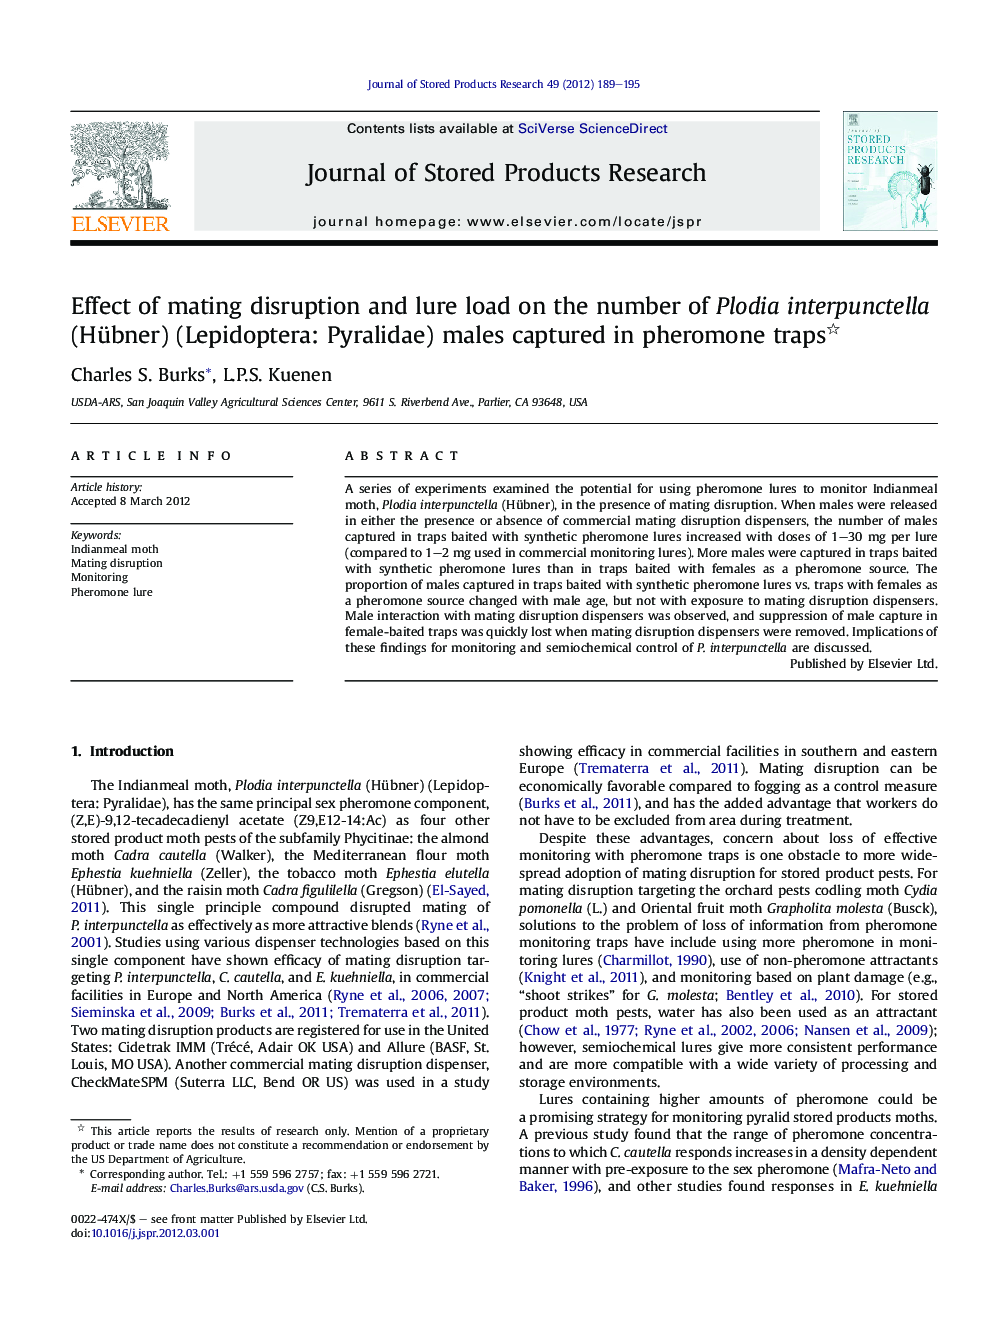 Effect of mating disruption and lure load on the number of Plodia interpunctella (Hübner) (Lepidoptera: Pyralidae) males captured in pheromone traps 